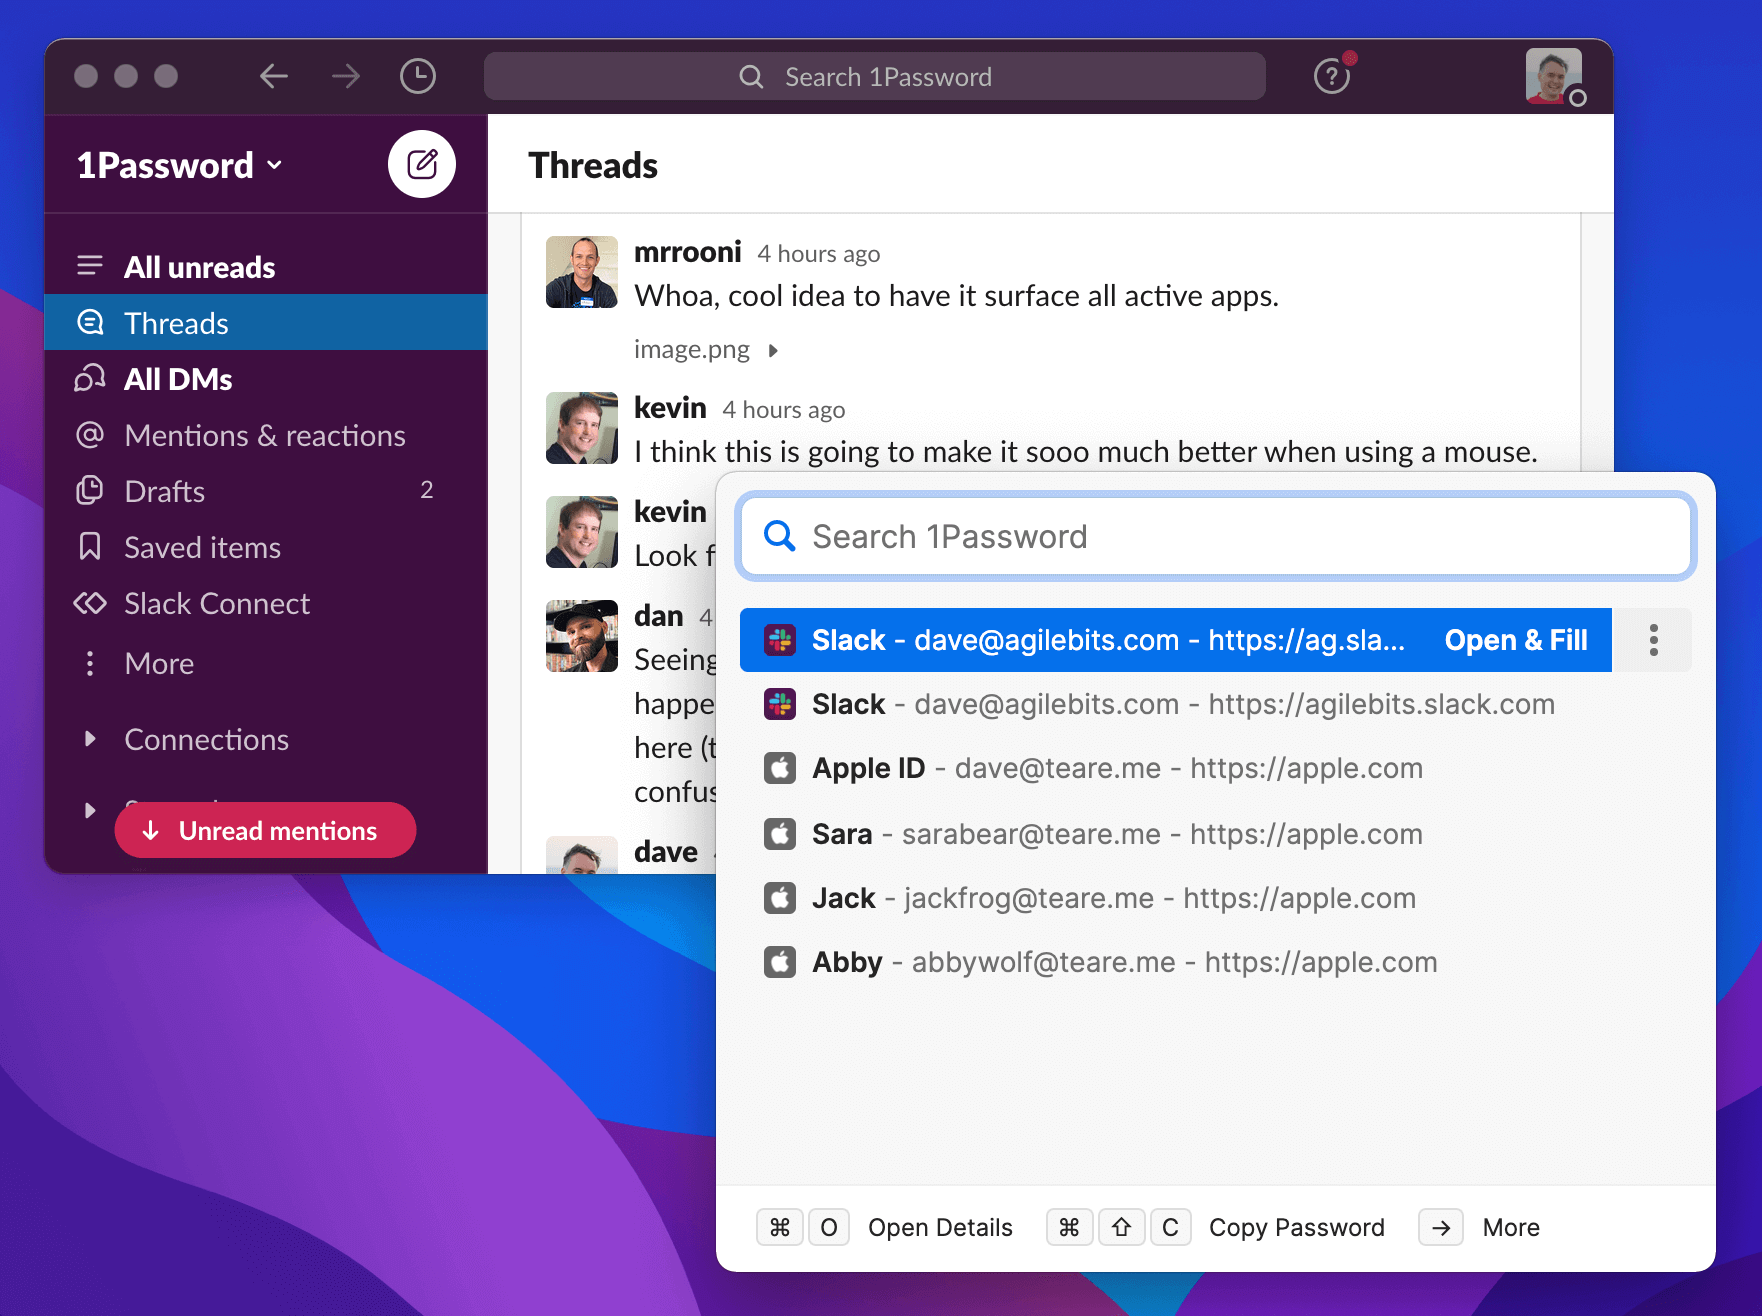 Launching Quick Access while Slack is open now showing matches logins for all open apps